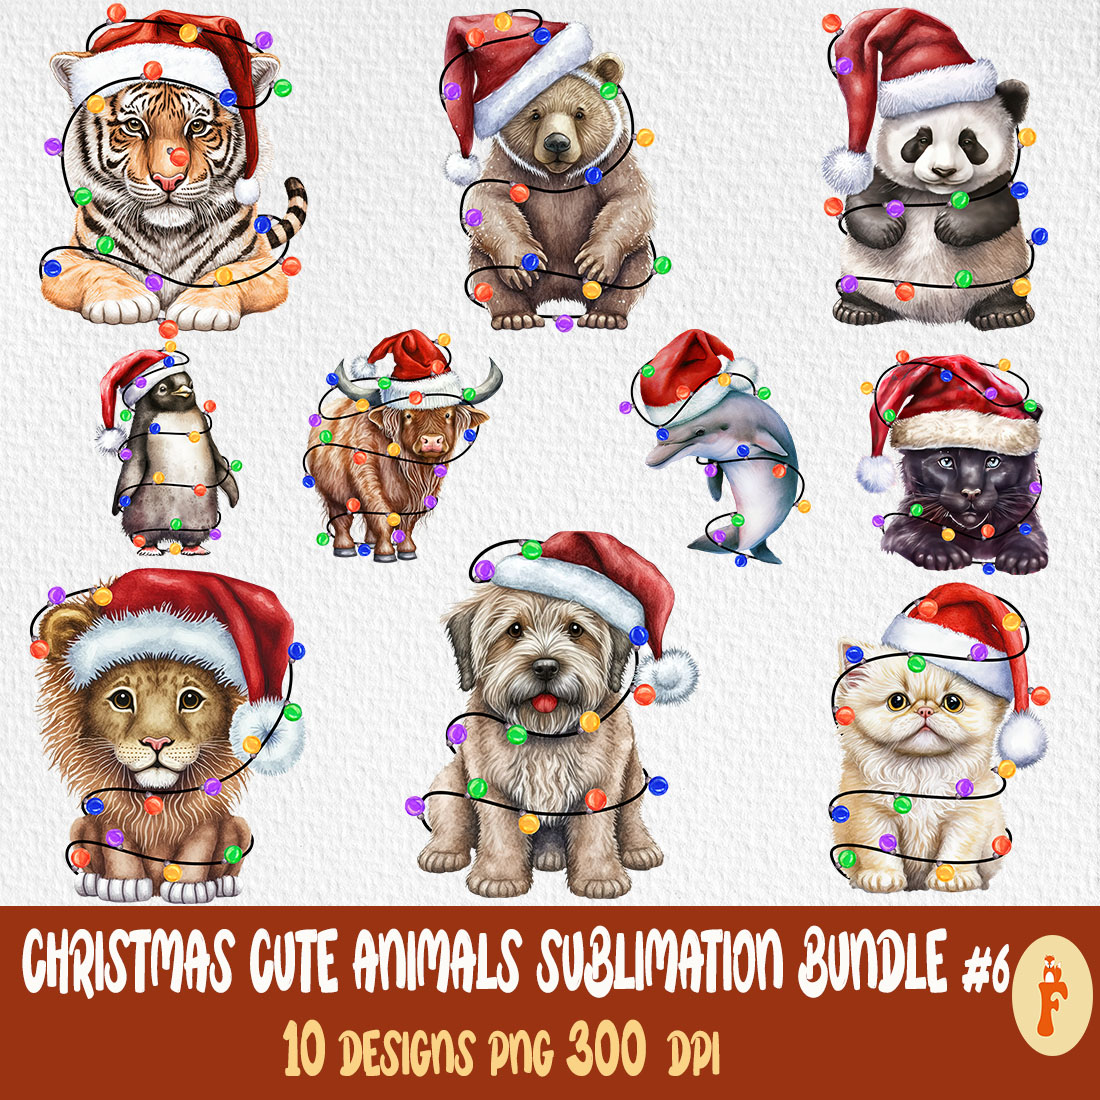 Set of wonderful images of animals in Christmas clothes.